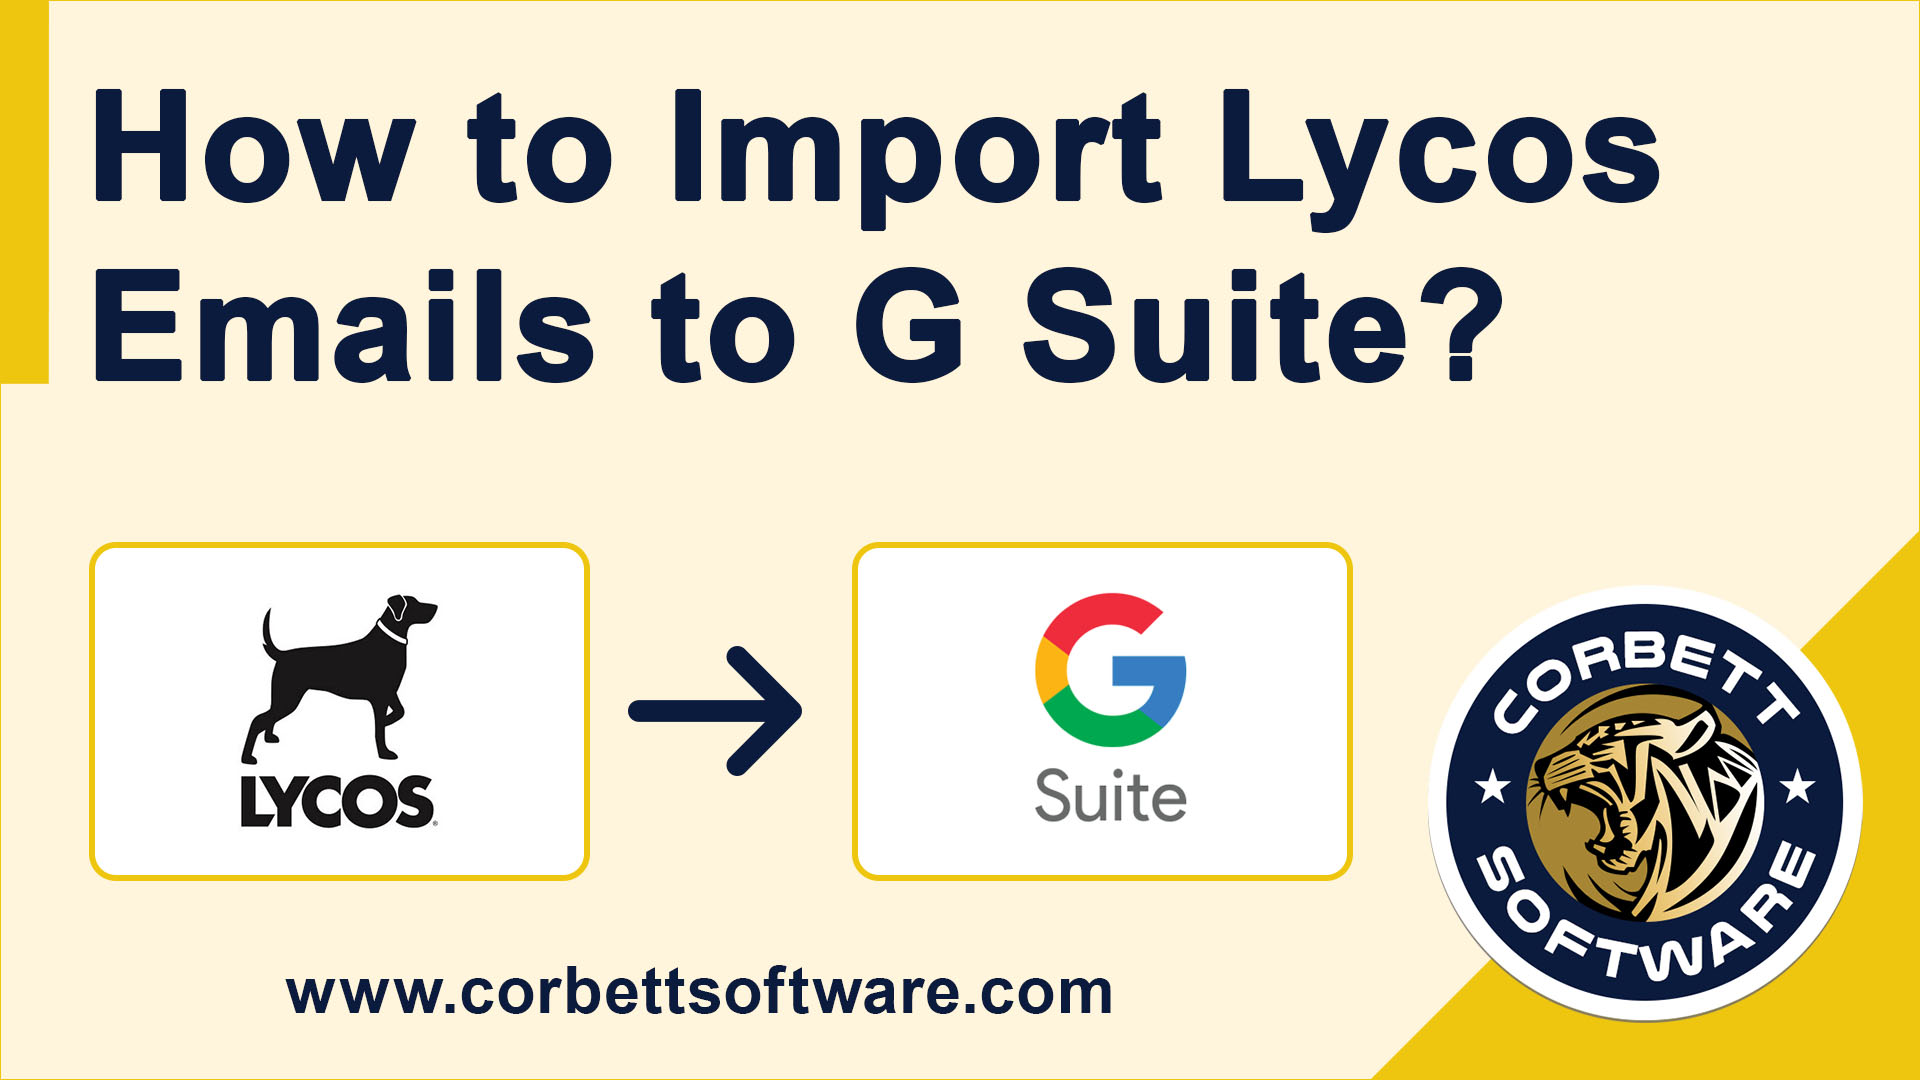 Import Lycos emails to G Suite